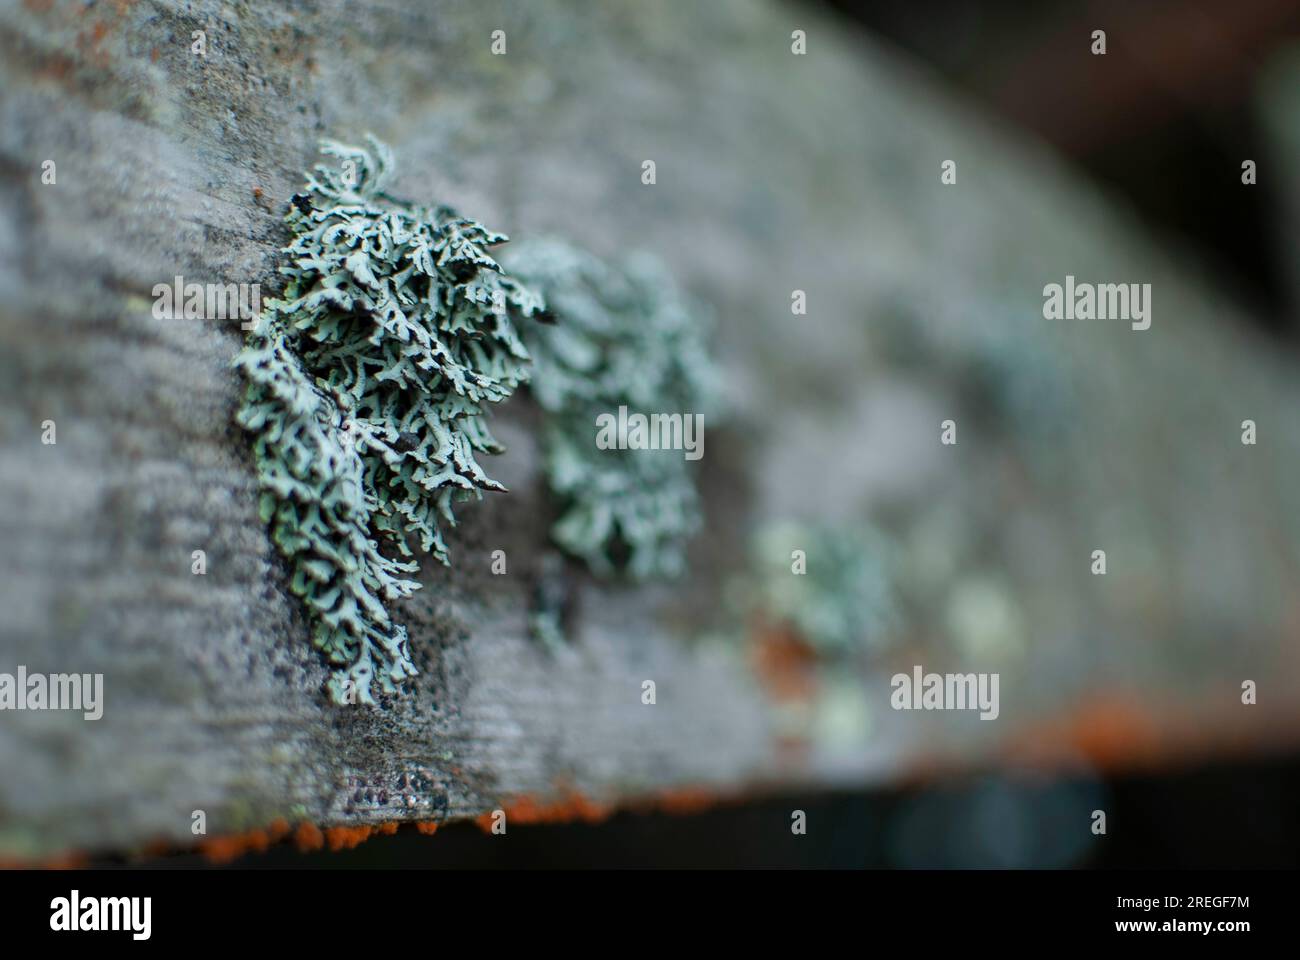 Colorful lichen grows on wood Stock Photo